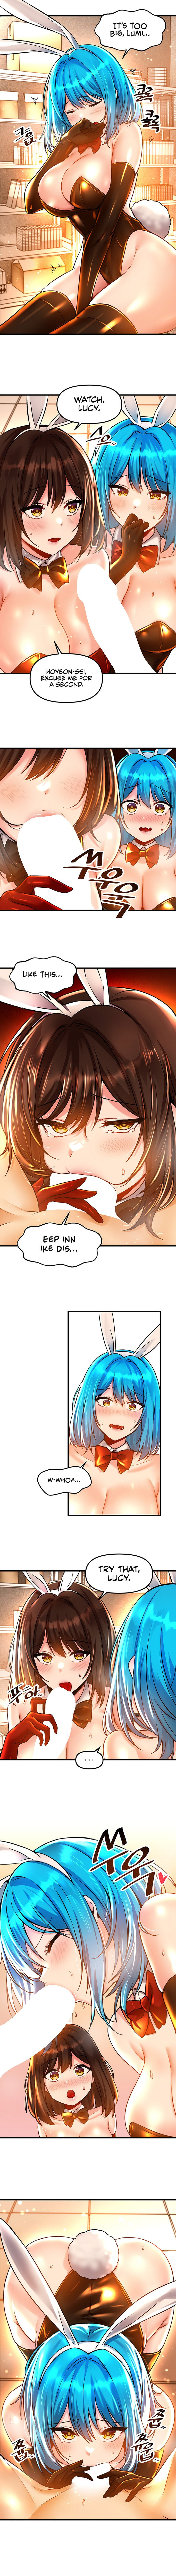 trapped-in-the-academys-eroge-chap-42-5